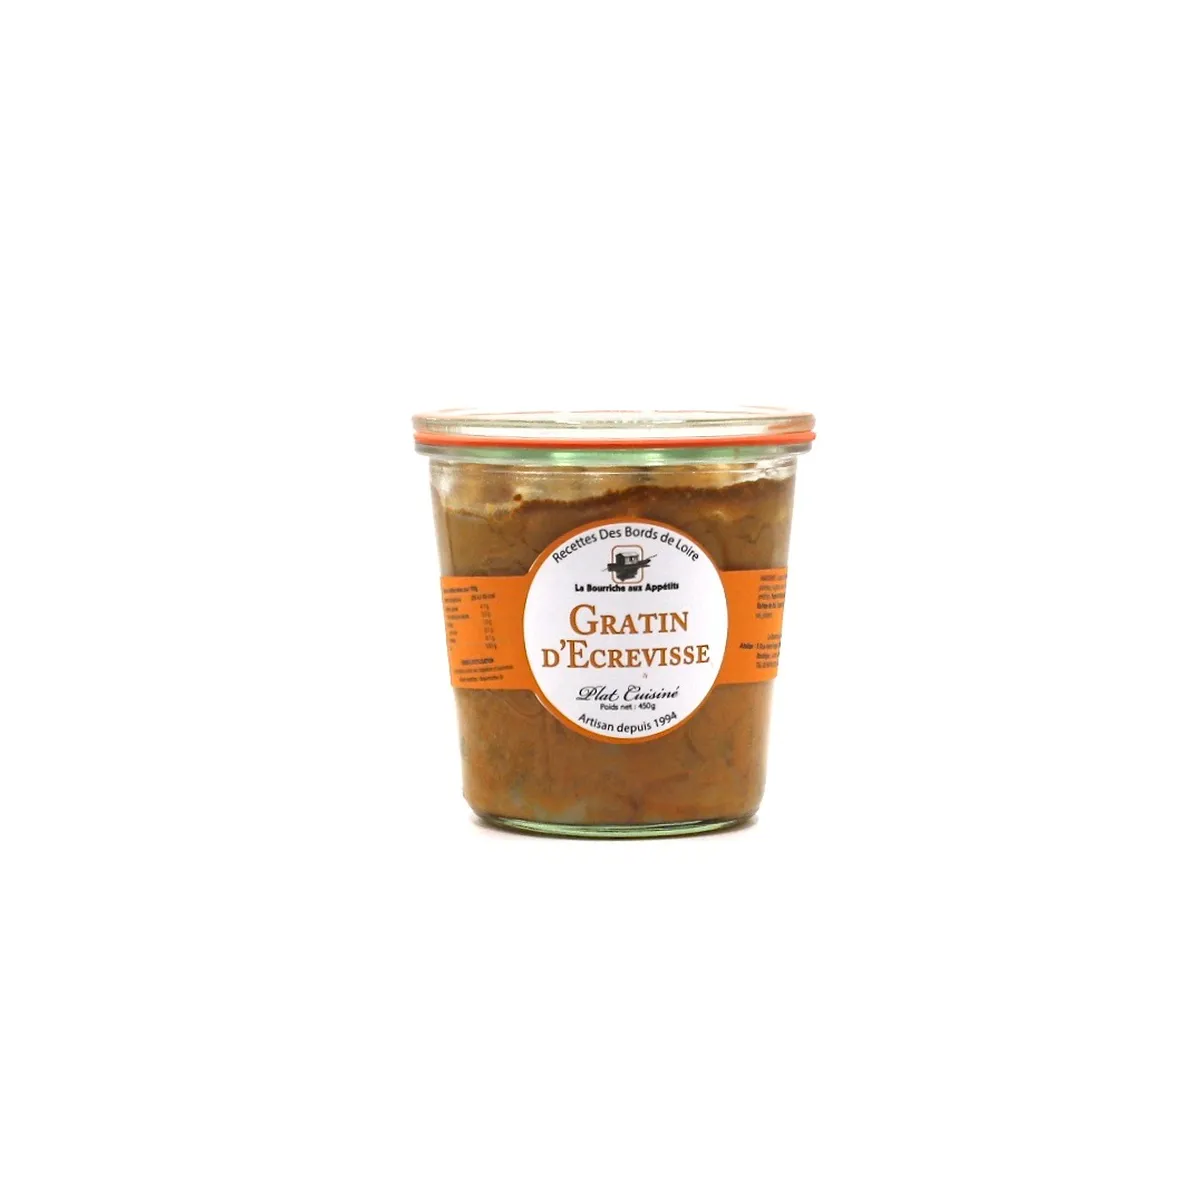 GRAIT OF QUEUES OF CRAYFISH BOURRICHE WITH APPETITS 450 G